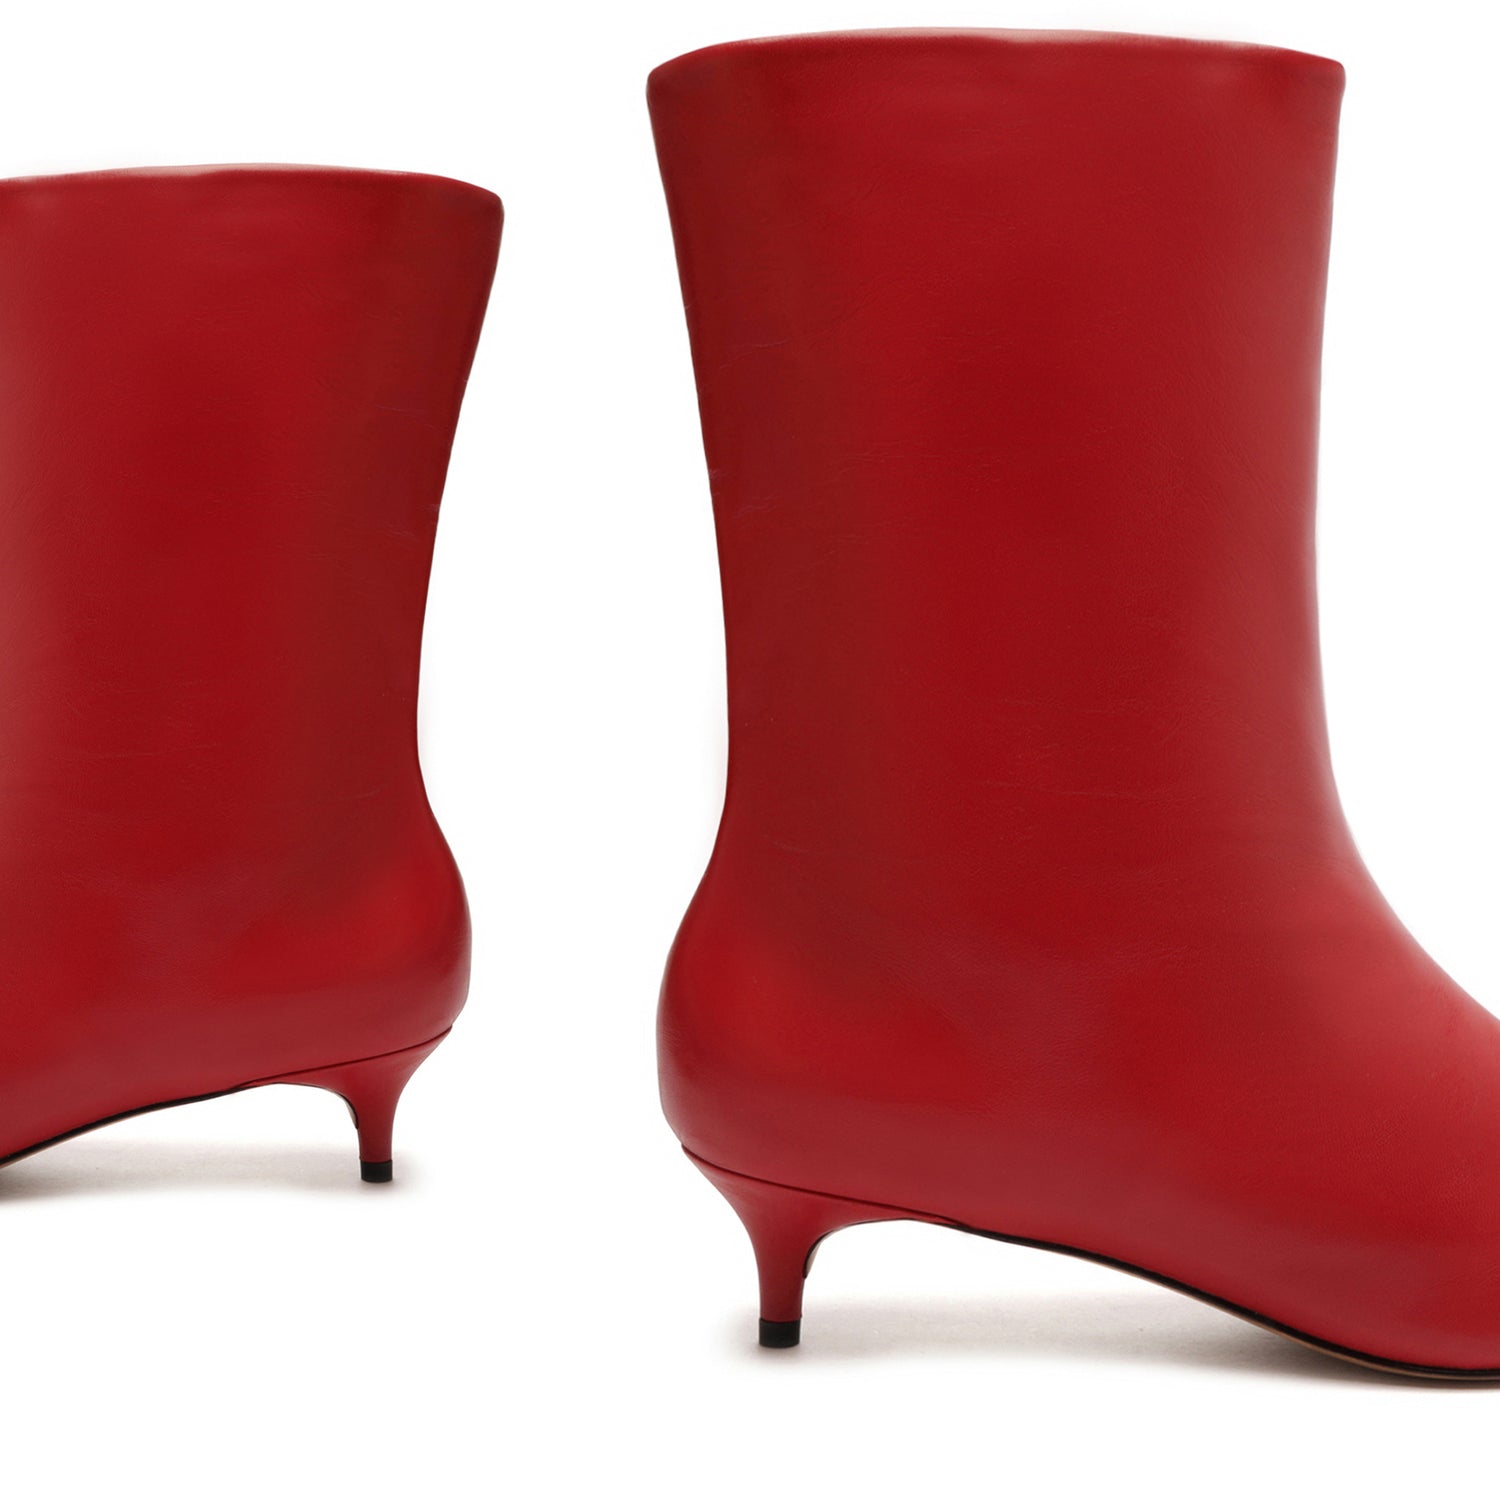 Gail Nappa Leather Bootie Booties Fall 23    - Schutz Shoes